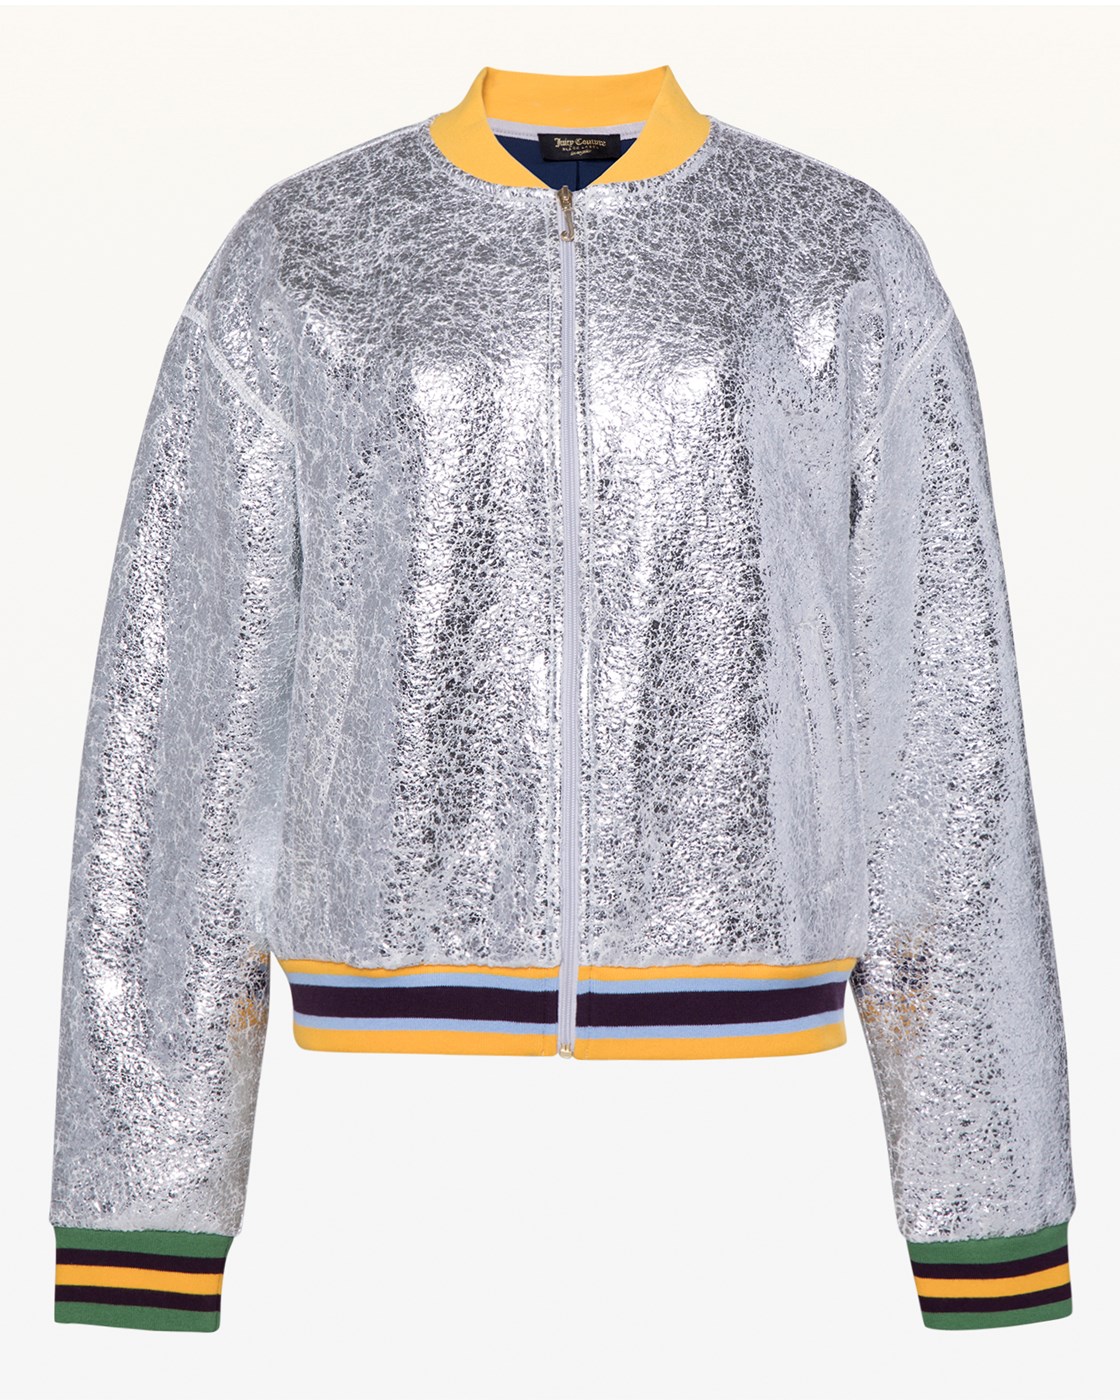 Juicy Couture Forever Crackle Foil Bomber Jacket